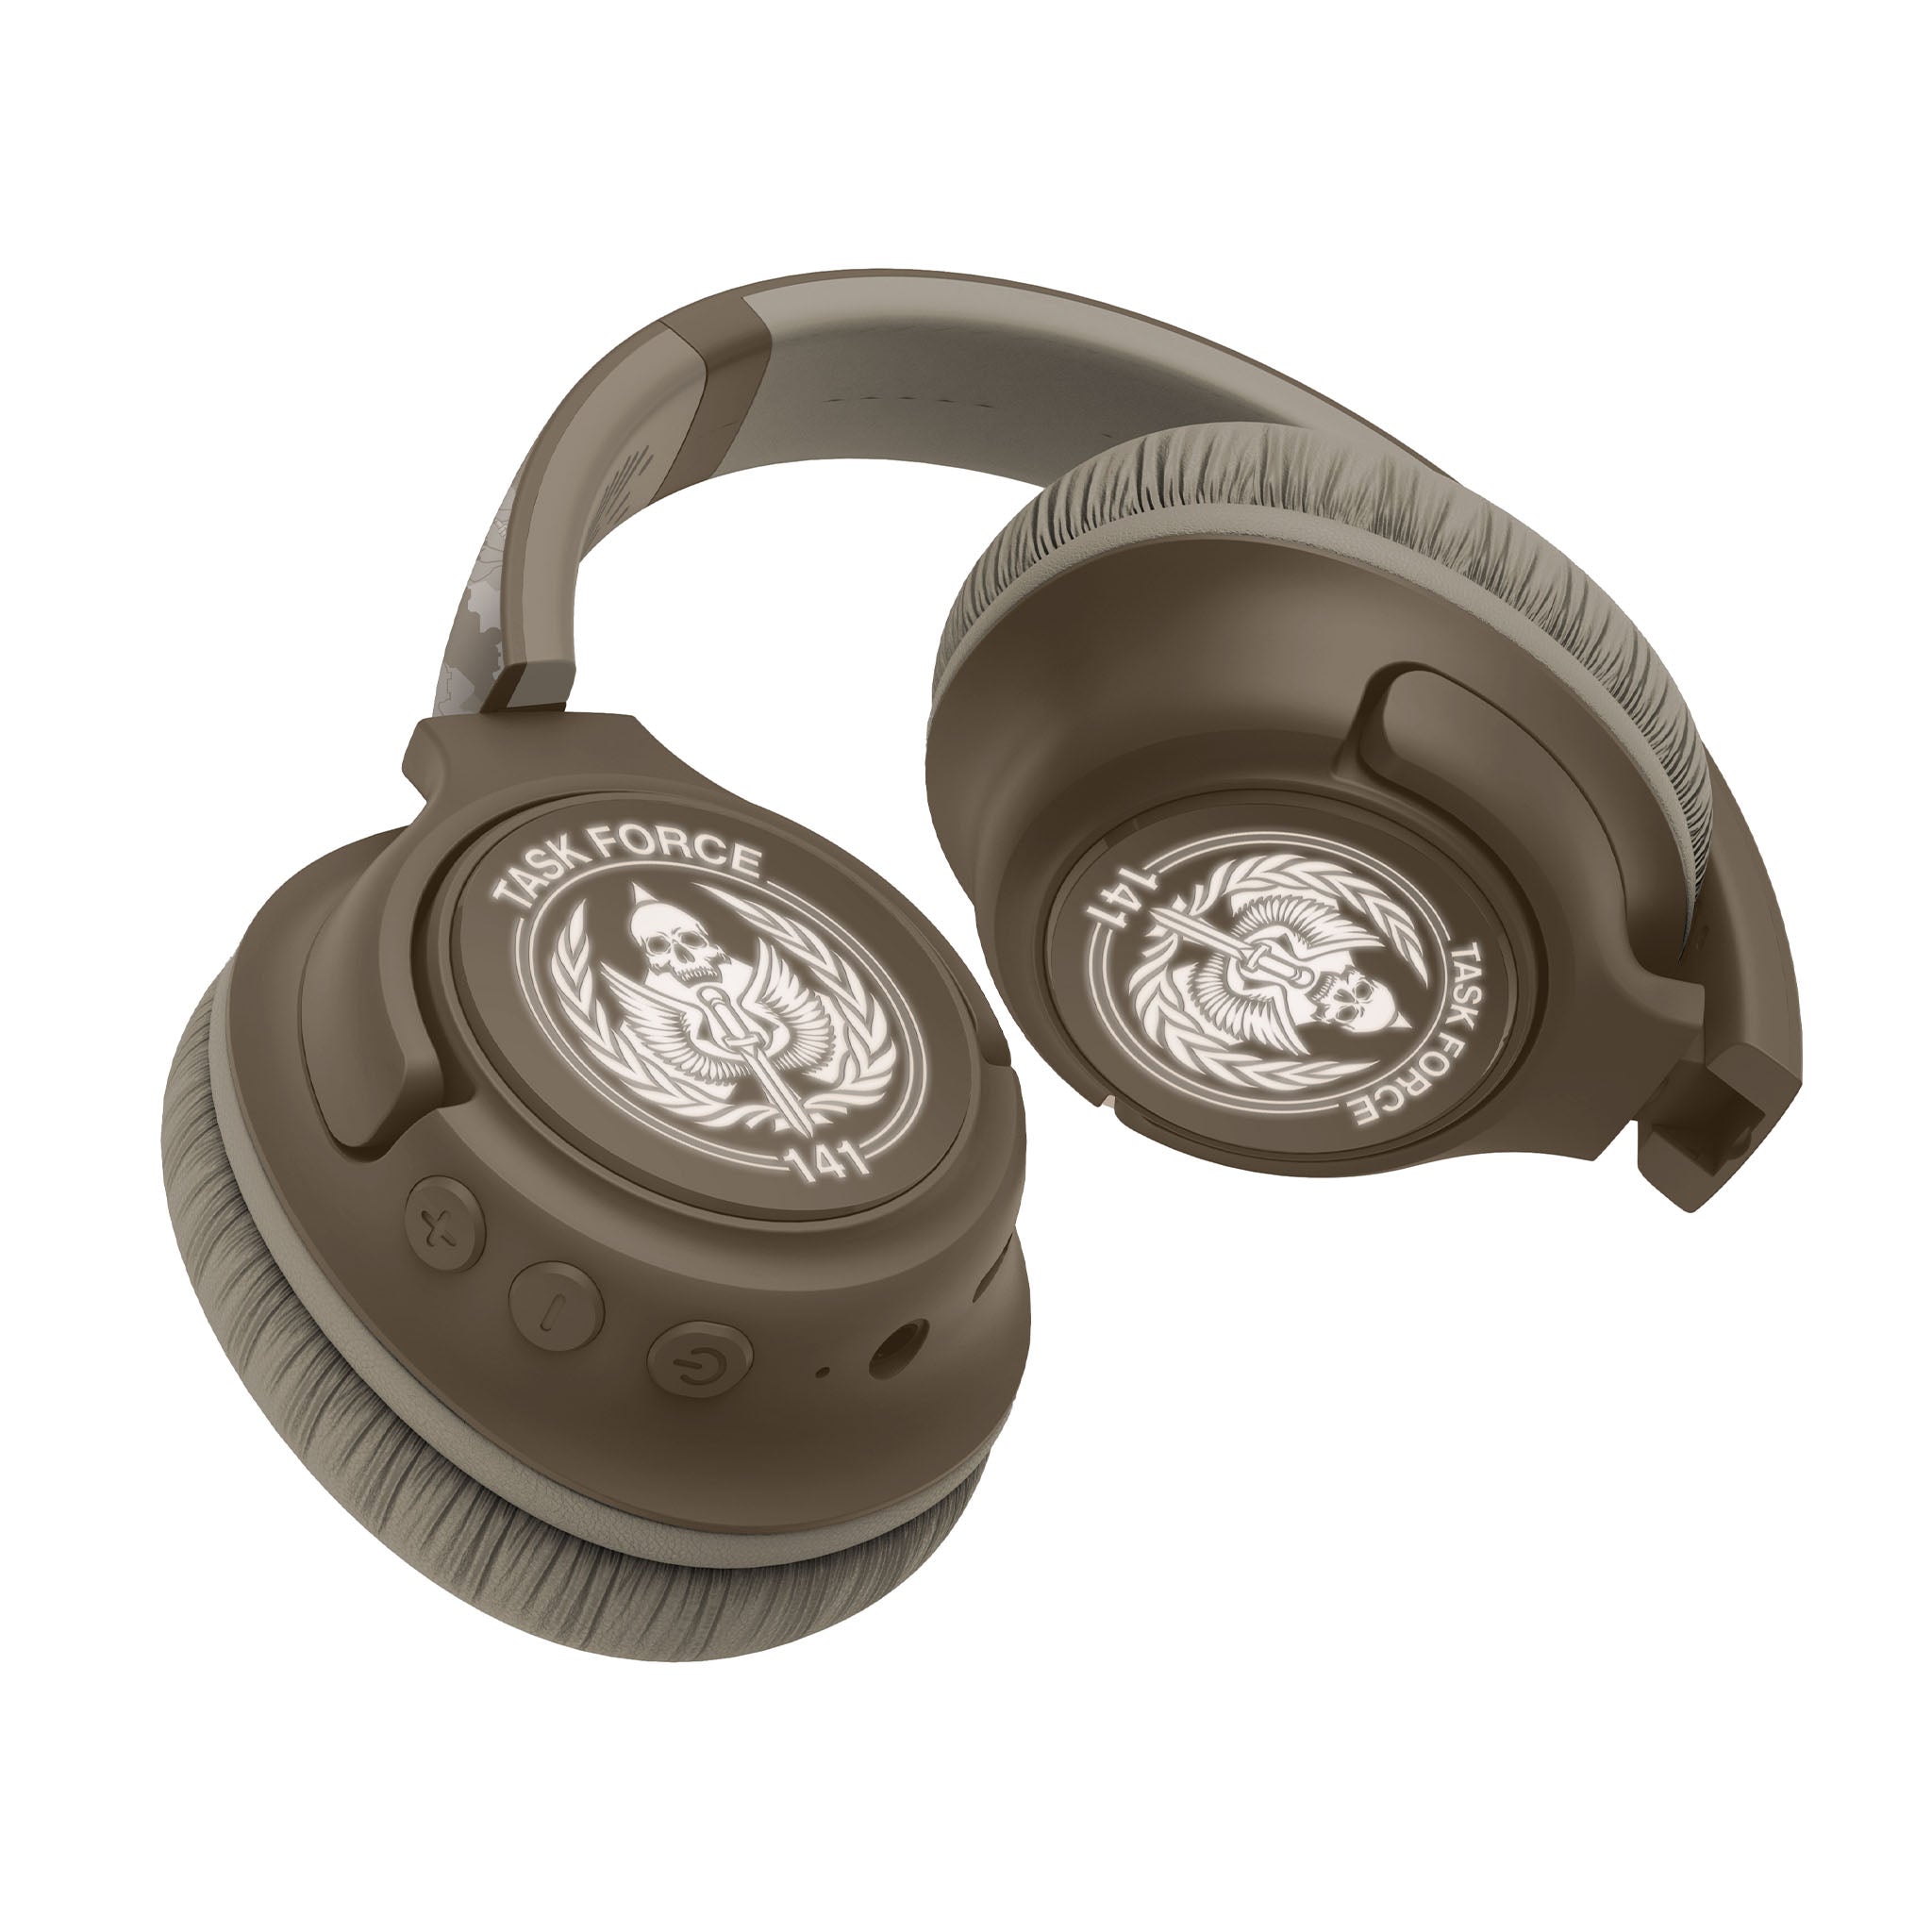 Call of Duty Wireless headphones with LED light